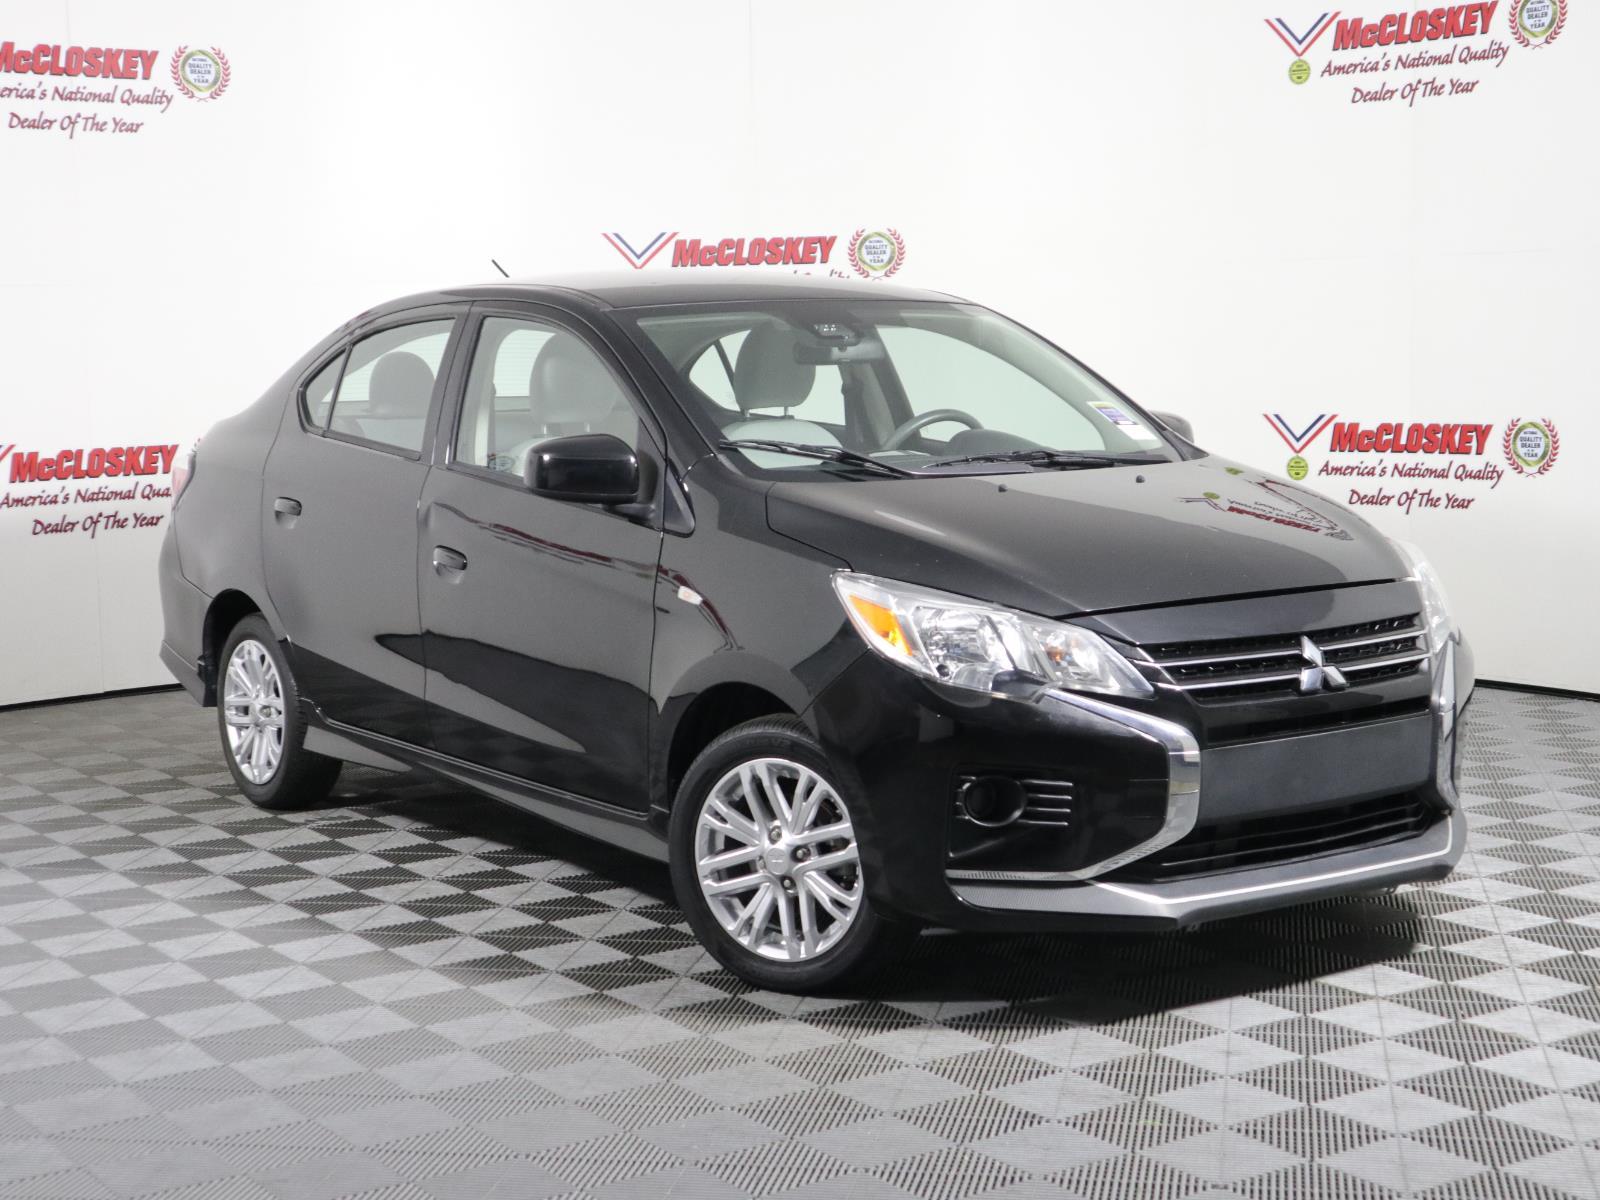 Preowned 2021 Mitsubishi Mirage G4 ES CARBONITE EDITION! NEW TIRES! 37 MPG! NEW SHOCKS/STRUTS! FORWARD COLLISION MITIGATION! for sale by McCloskey Imports & 4X4's in Colorado Springs, CO